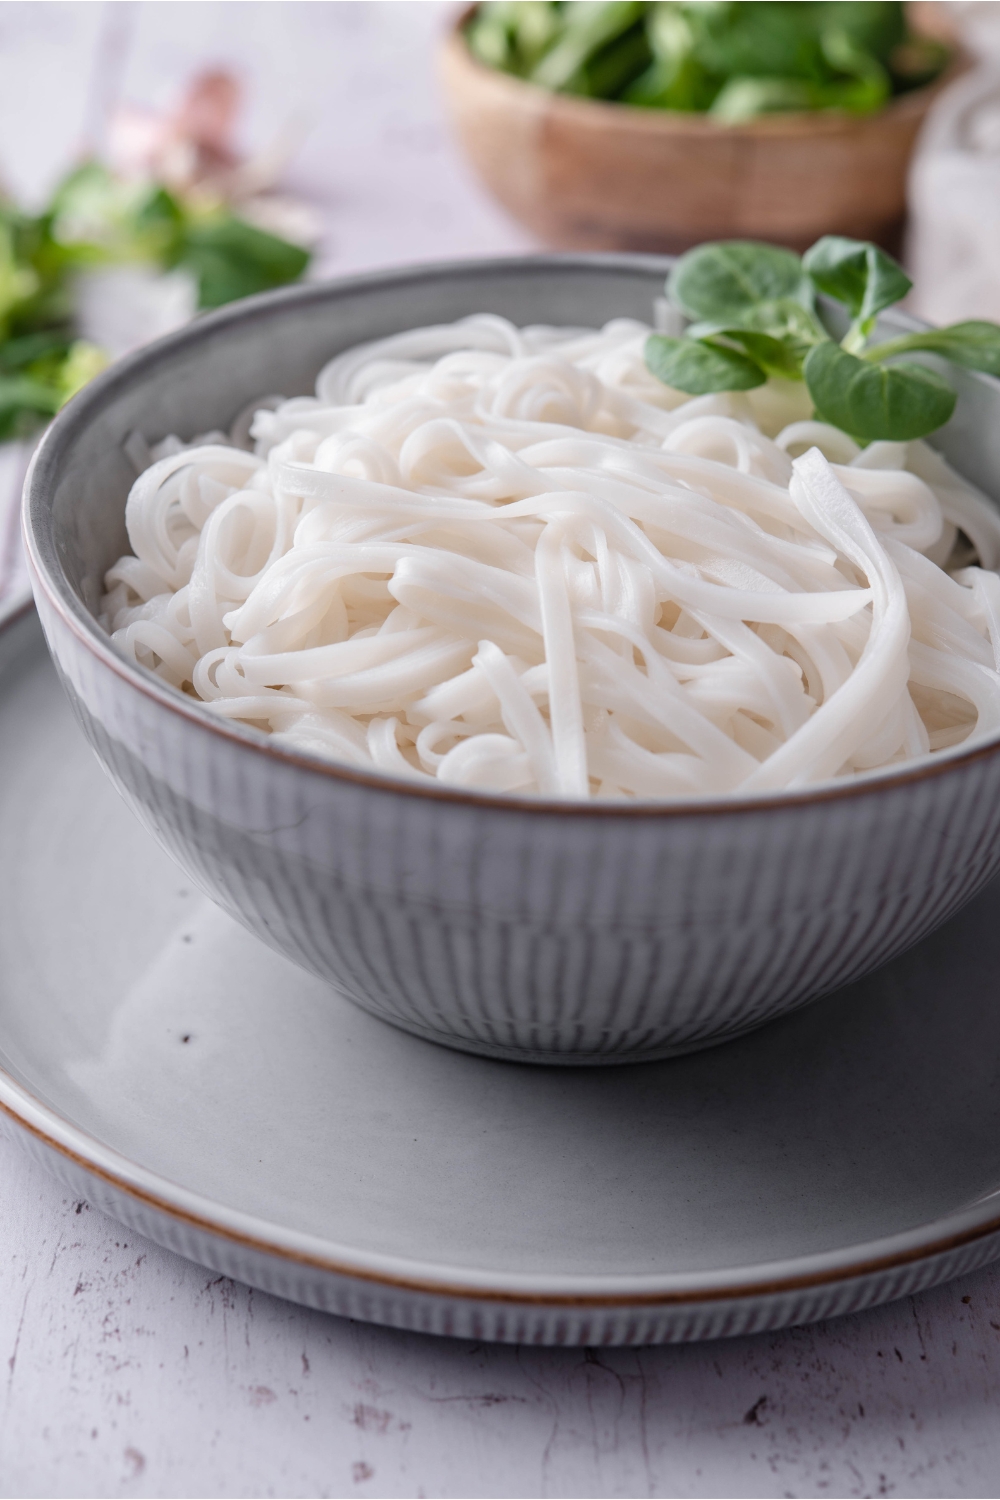 A bowl of cooked rice noodles atop a blue plate with a sprig of fresh green herbs in the bowl.